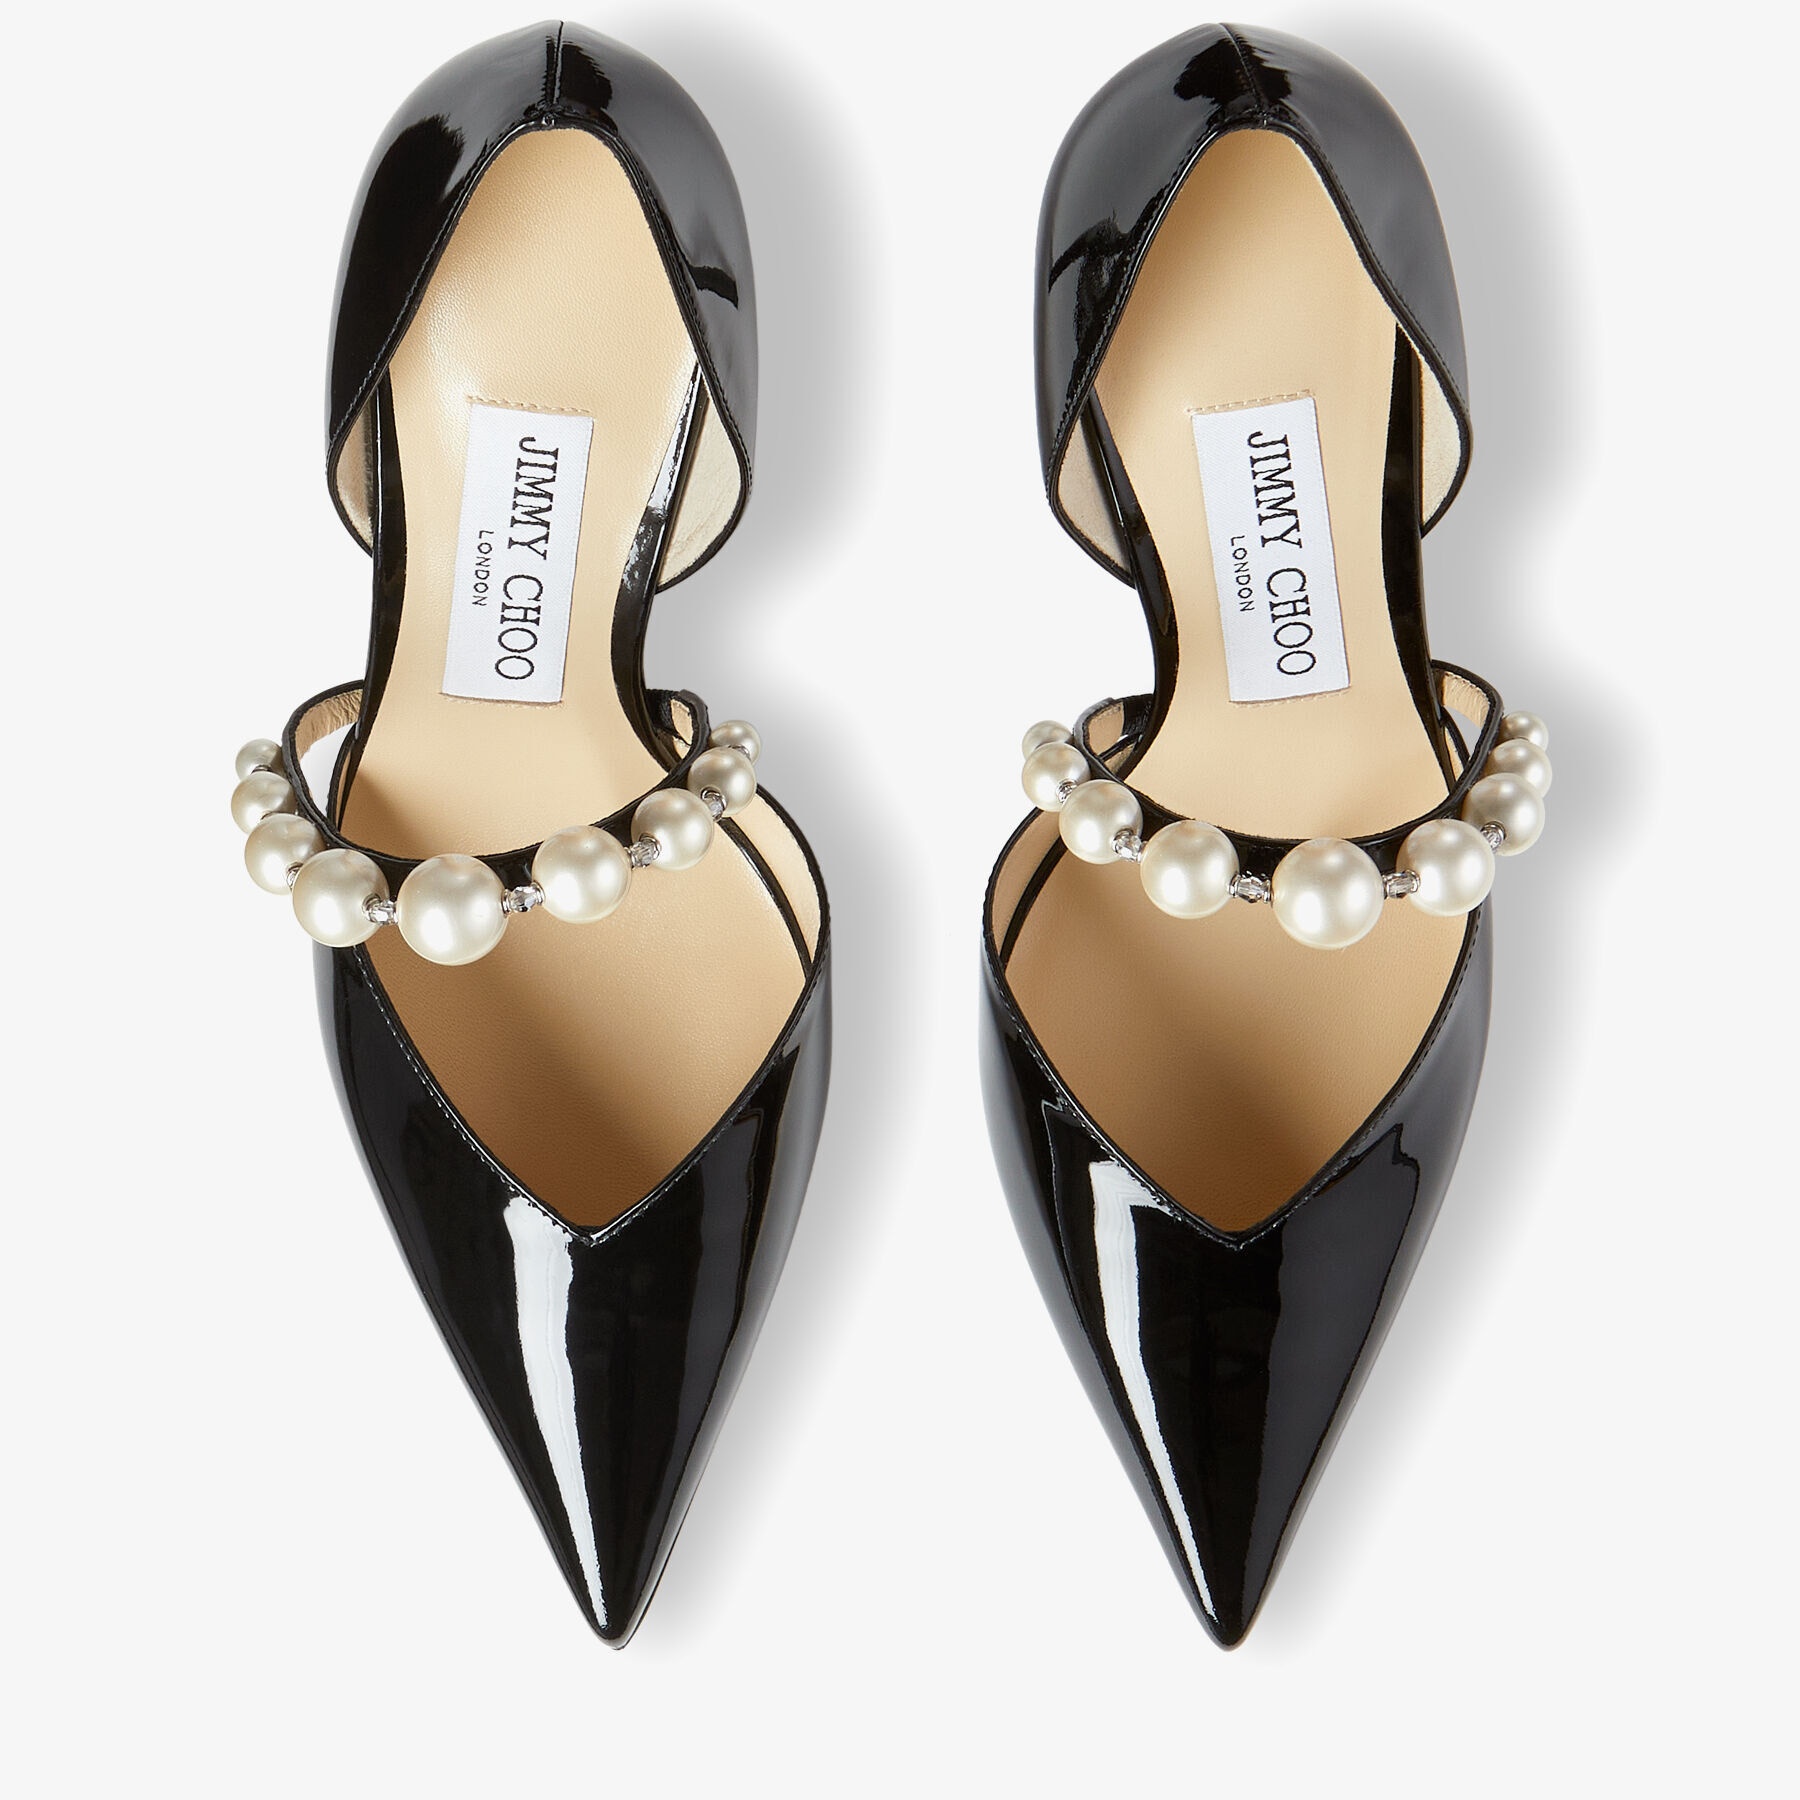 Aurelie 85
Black Patent Leather Pointed Pumps with Pearl Embellishment - 5